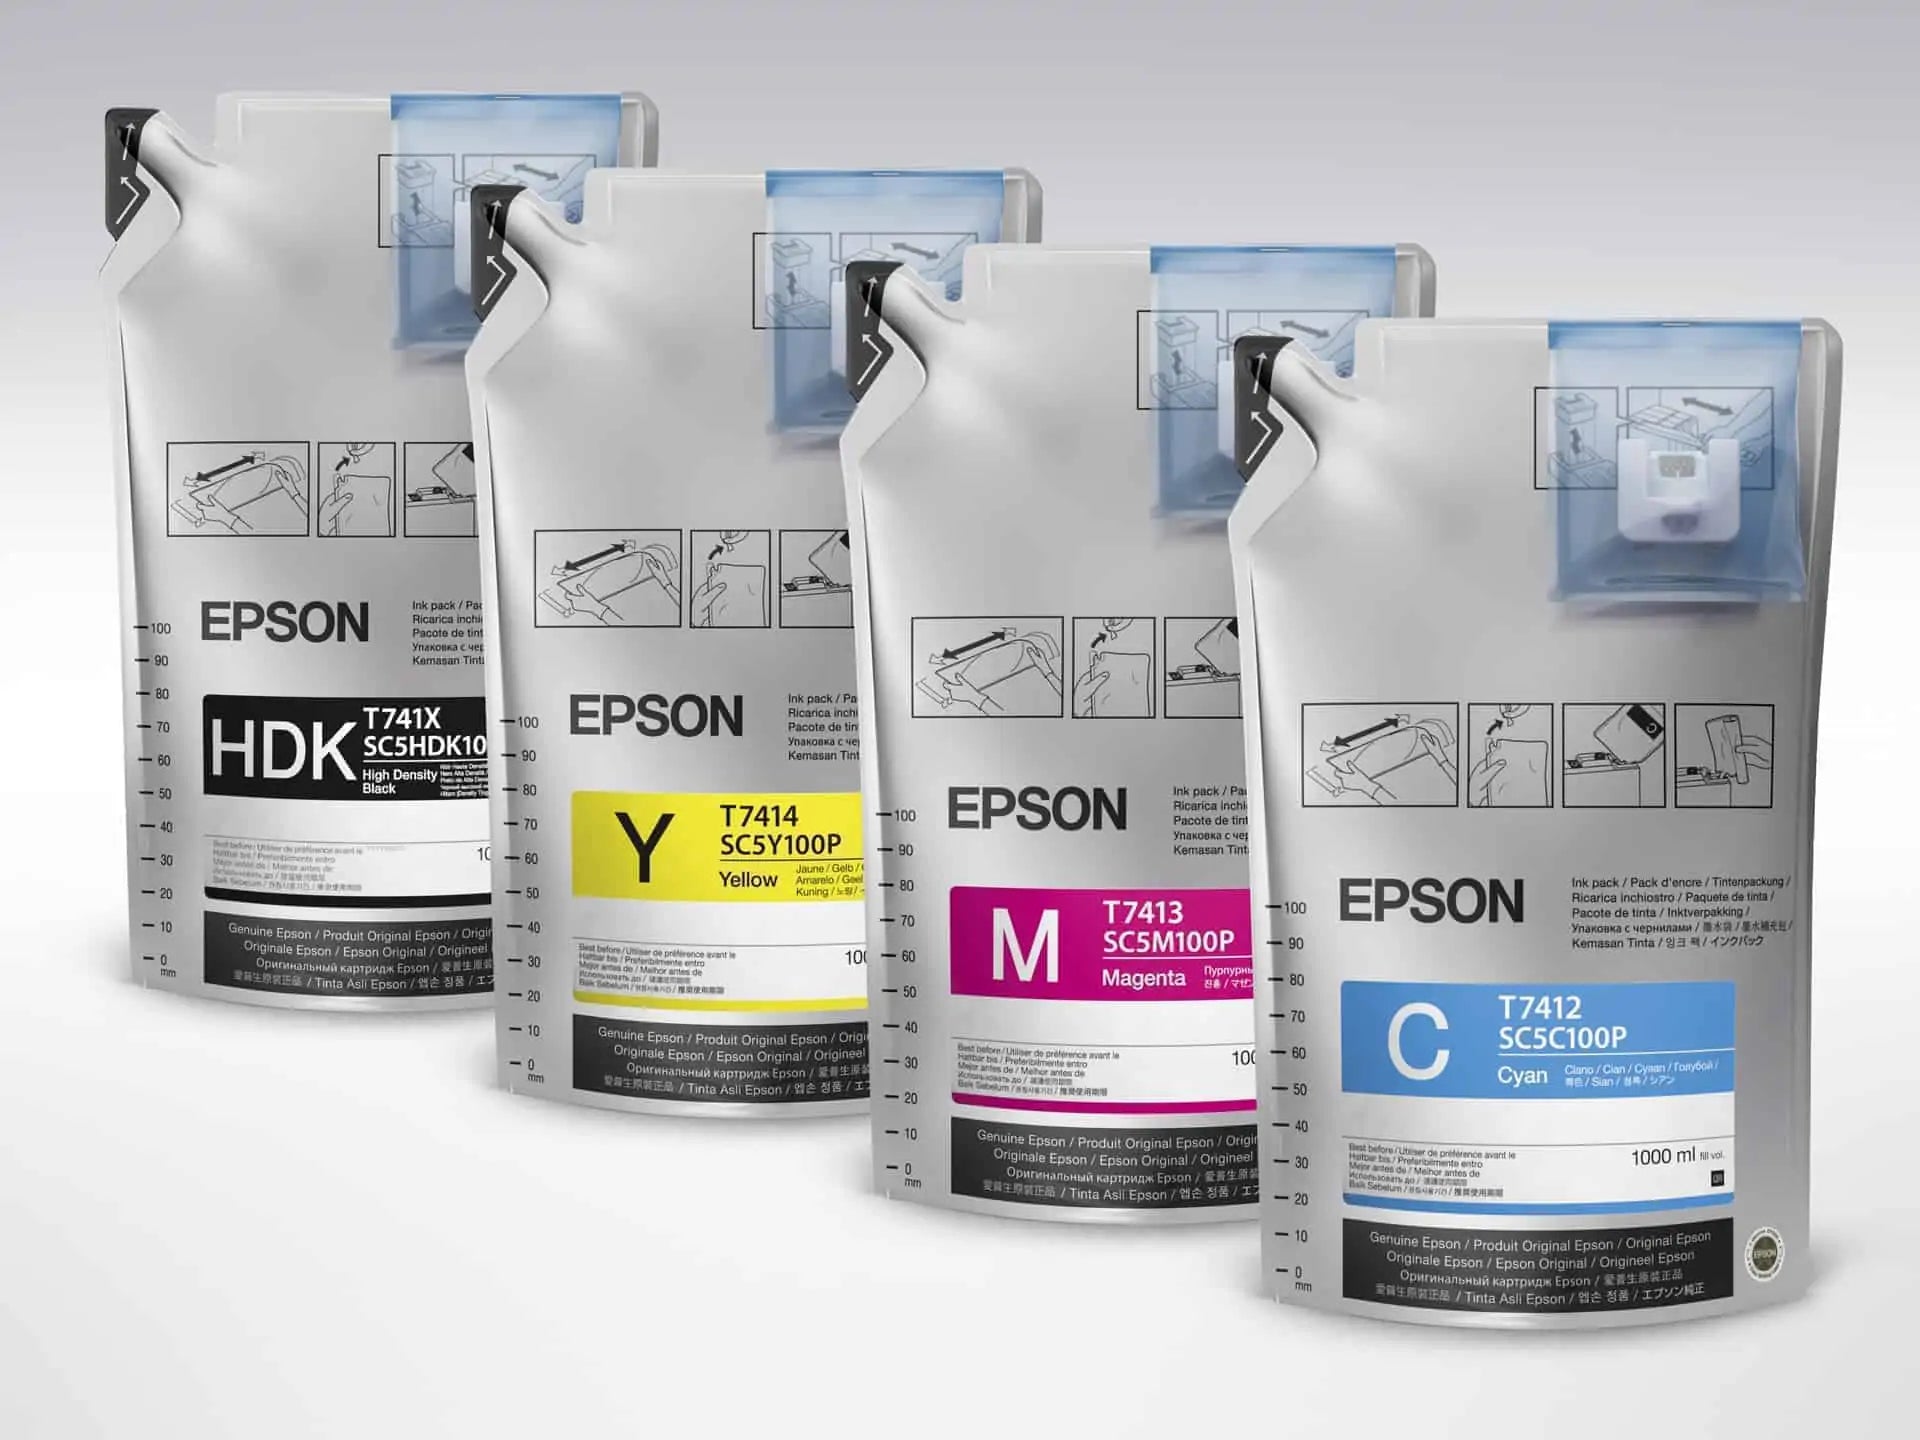 Epson® F6200/F7200 inks - Joto Imaging Supplies Canada